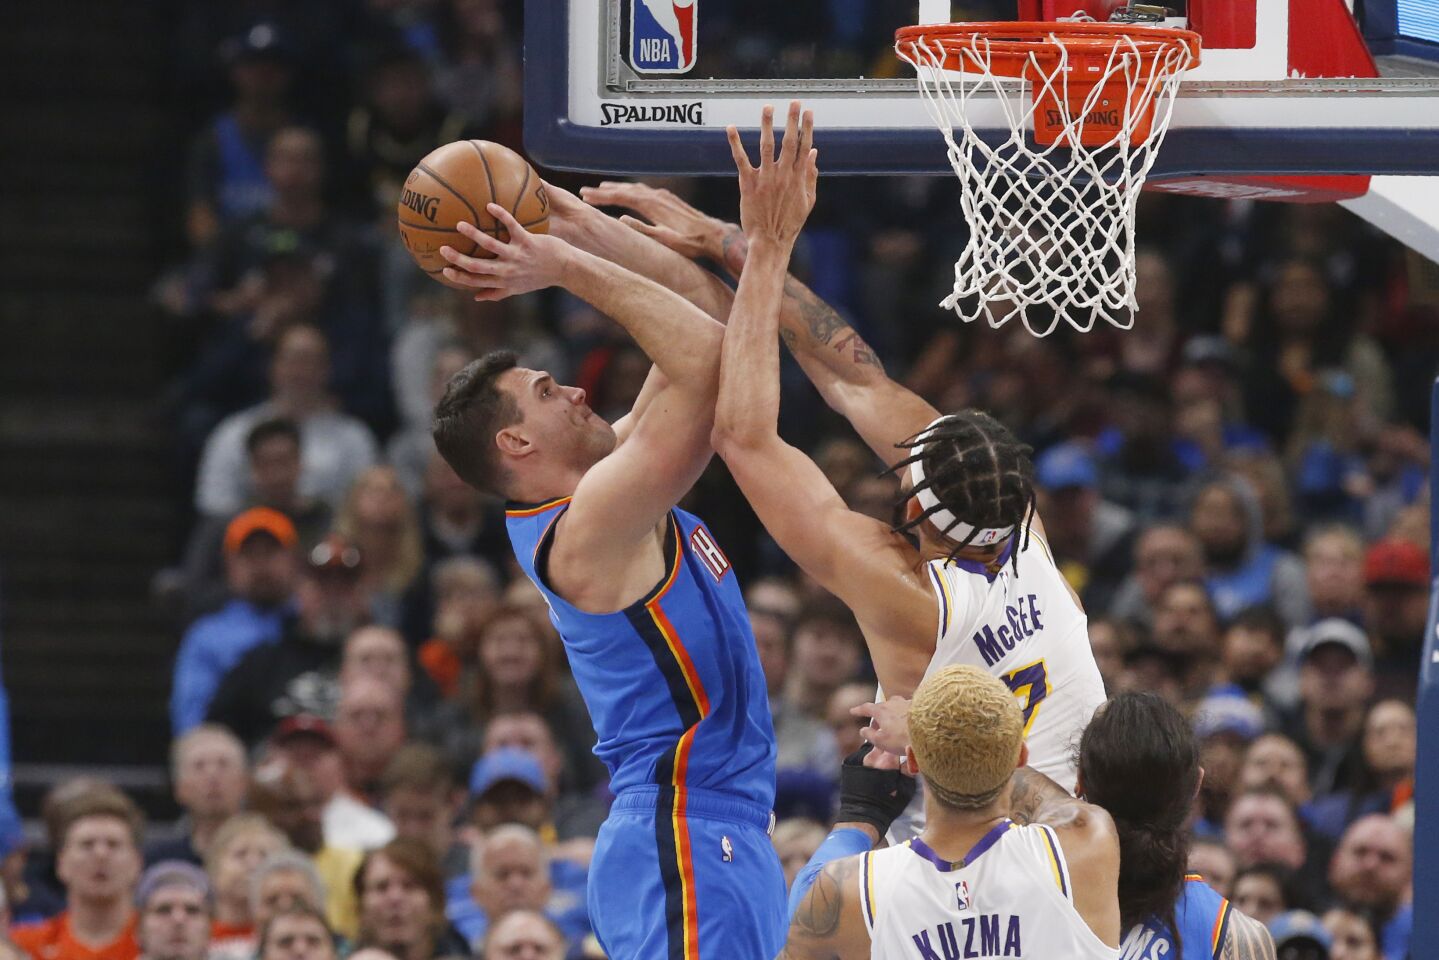 Thunder forward Danilo Gallinari is fouled by Lakers center JaVale McGee (7) during a game Jan. 11 at Chesapeake Energy Arena.